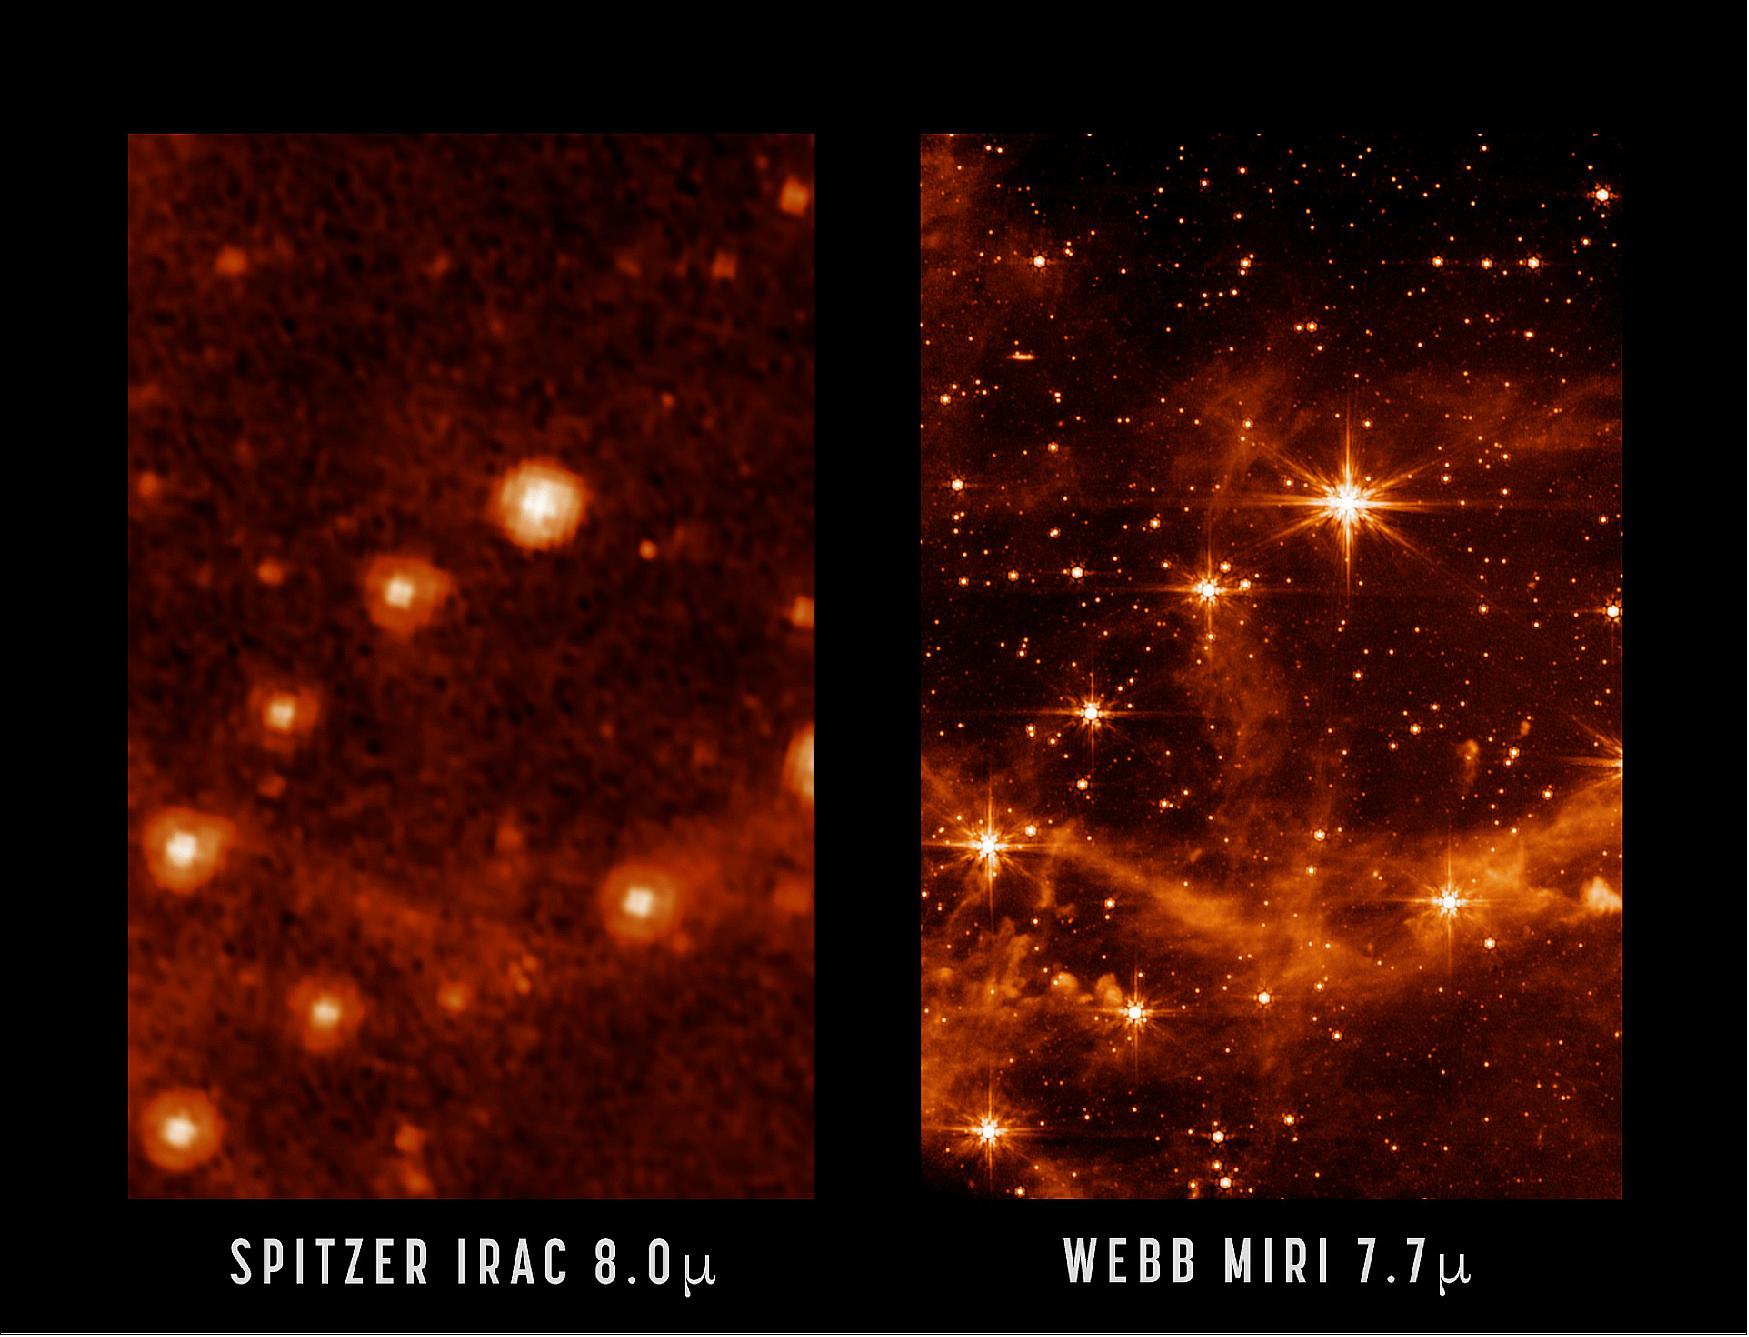 Figure 19: MIRI and Spitzer comparison image. The MIRI test image (at 7.7 µm) shows part of the Large Magellanic Cloud. This small satellite galaxy of the Milky Way provided a dense star field to test Webb's performance. Here, a close-up of the MIRI image is compared to a past image of the same target taken with NASA's Spitzer Space Telescope's Infrared Array Camera (at 8.0 µm). The retired Spitzer was the first observatory to provide high-resolution images of the near- and mid-infrared Universe. Webb, by virtue of its significantly larger primary mirror and improved detectors, will allow us to see the infrared sky with improved clarity, enabling even more discoveries (image credit: Spitzer: NASA/JPL-Caltech; MIRI: NASA/ESA/CSA/STScI)